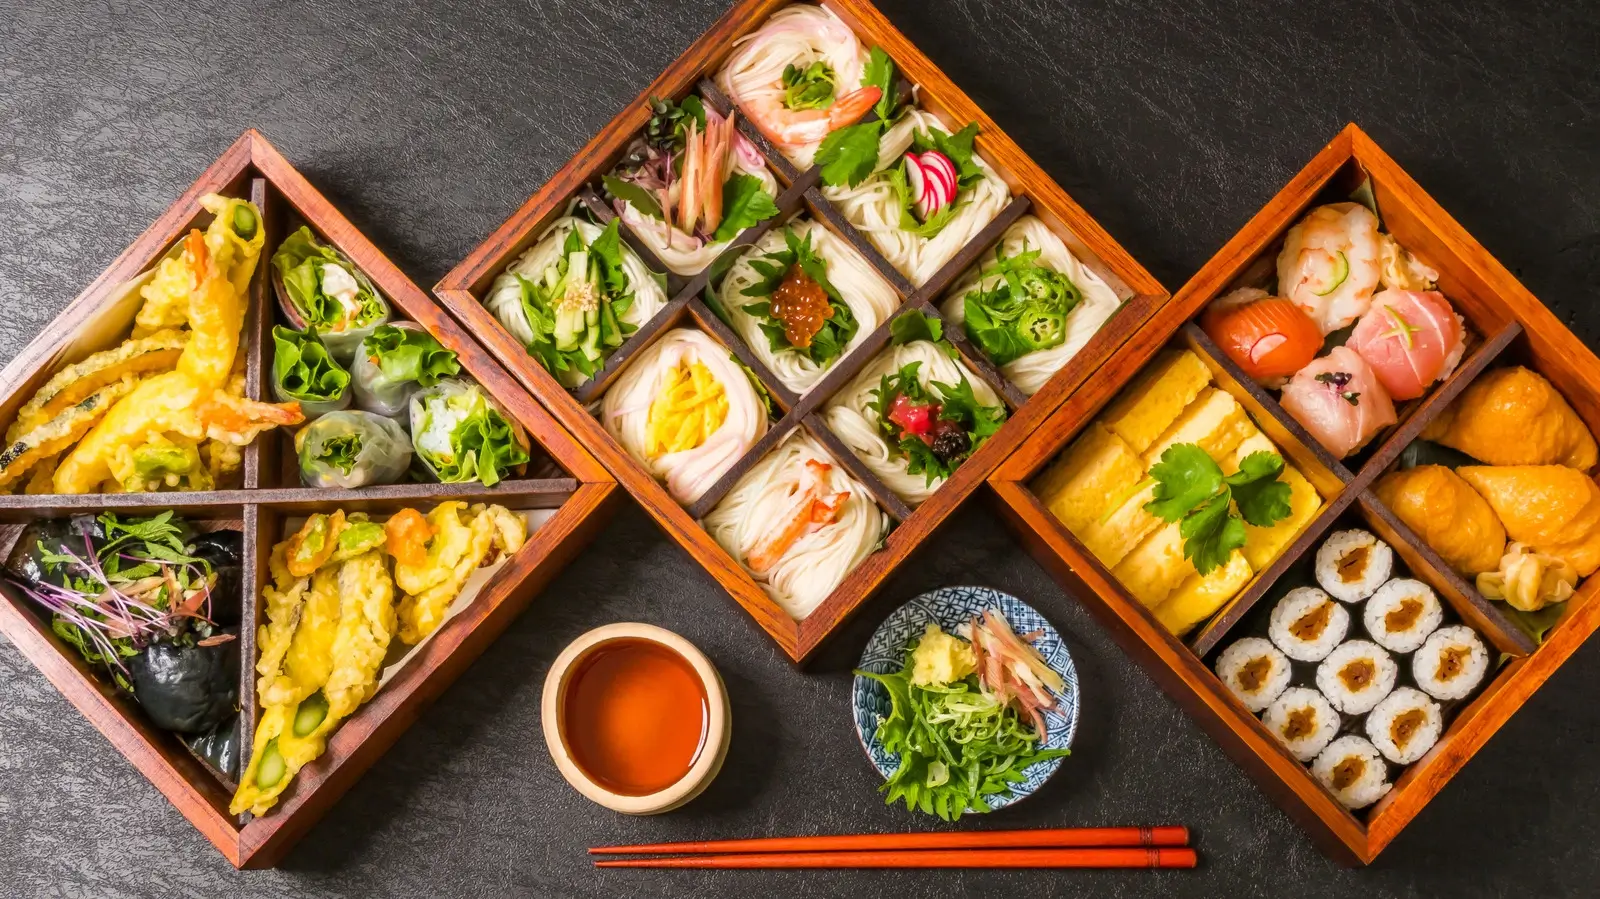 Most Delicious Food: A selection of traditional Japanese dishes such as sushi, sashimi, and tempura, highlighting the delicate presentation and fresh flavors of Japanese cuisine.